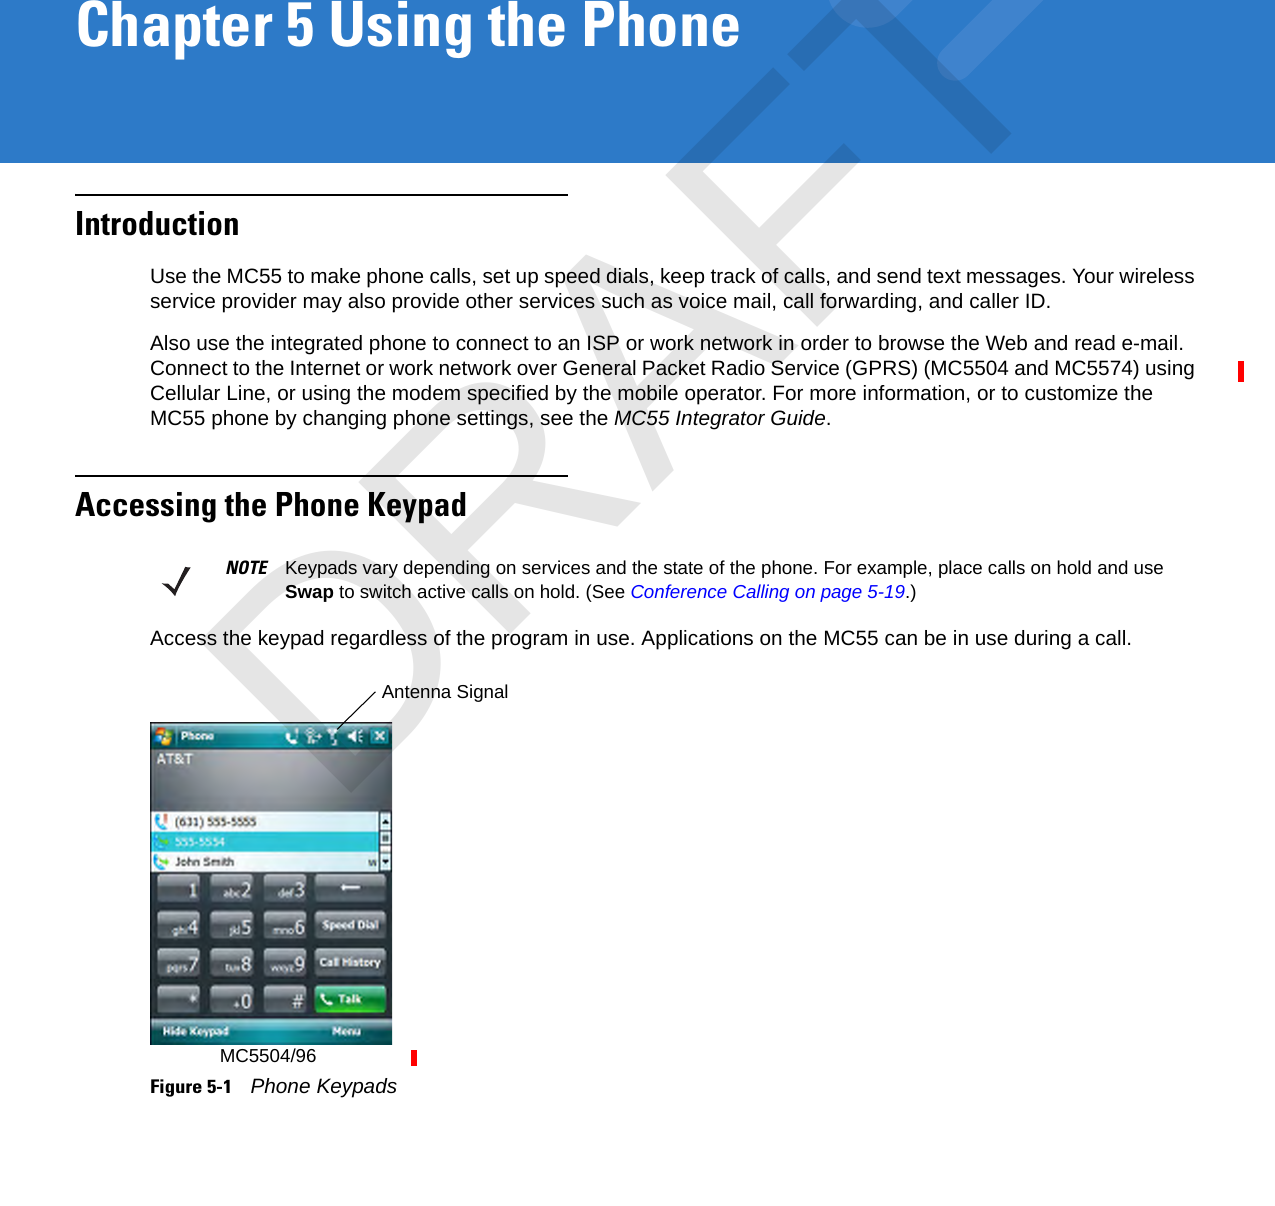 Chapter 5 Using the PhoneIntroductionUse the MC55 to make phone calls, set up speed dials, keep track of calls, and send text messages. Your wireless service provider may also provide other services such as voice mail, call forwarding, and caller ID.Also use the integrated phone to connect to an ISP or work network in order to browse the Web and read e-mail. Connect to the Internet or work network over General Packet Radio Service (GPRS) (MC5504 and MC5574) using Cellular Line, or using the modem specified by the mobile operator. For more information, or to customize the MC55 phone by changing phone settings, see the MC55 Integrator Guide.Accessing the Phone KeypadAccess the keypad regardless of the program in use. Applications on the MC55 can be in use during a call.Figure 5-1    Phone KeypadsNOTE Keypads vary depending on services and the state of the phone. For example, place calls on hold and use Swap to switch active calls on hold. (See Conference Calling on page 5-19.)Antenna SignalMC5504/96DRAFT